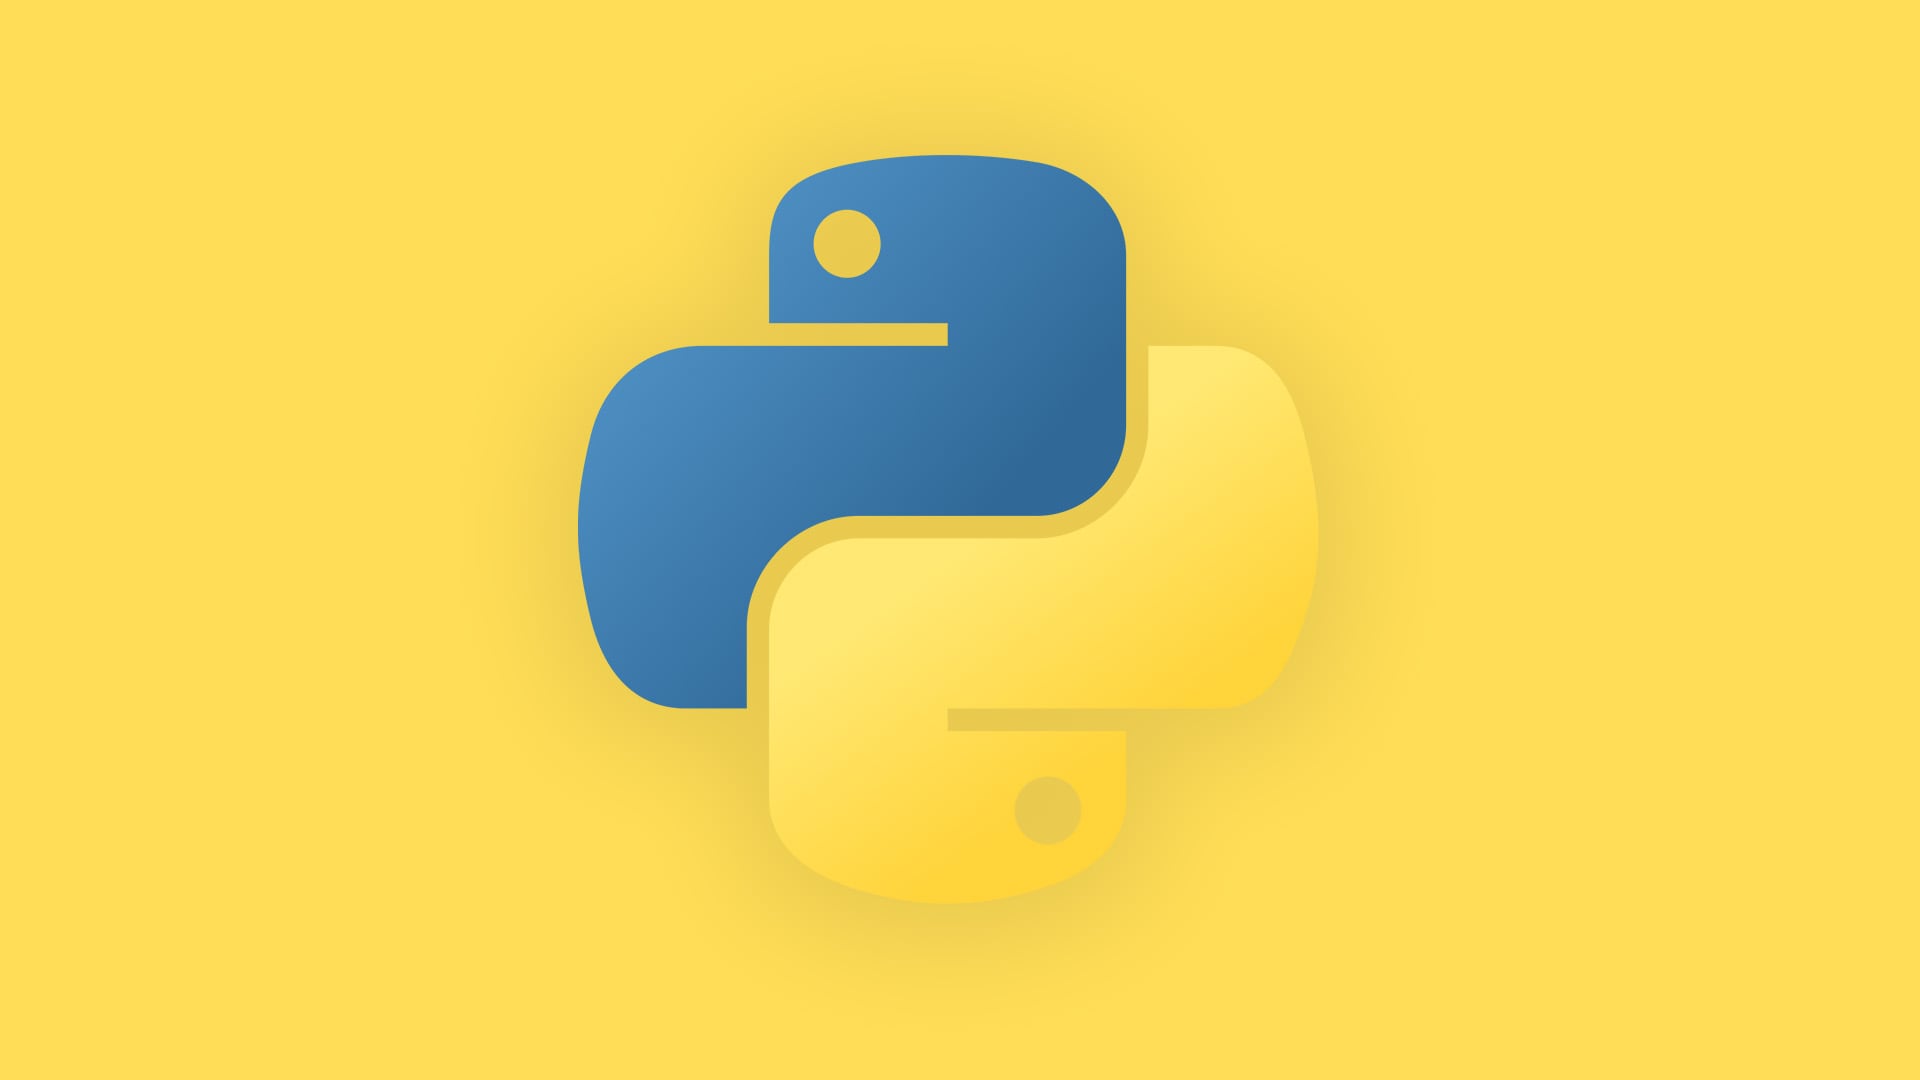 How to Install Python on Linux